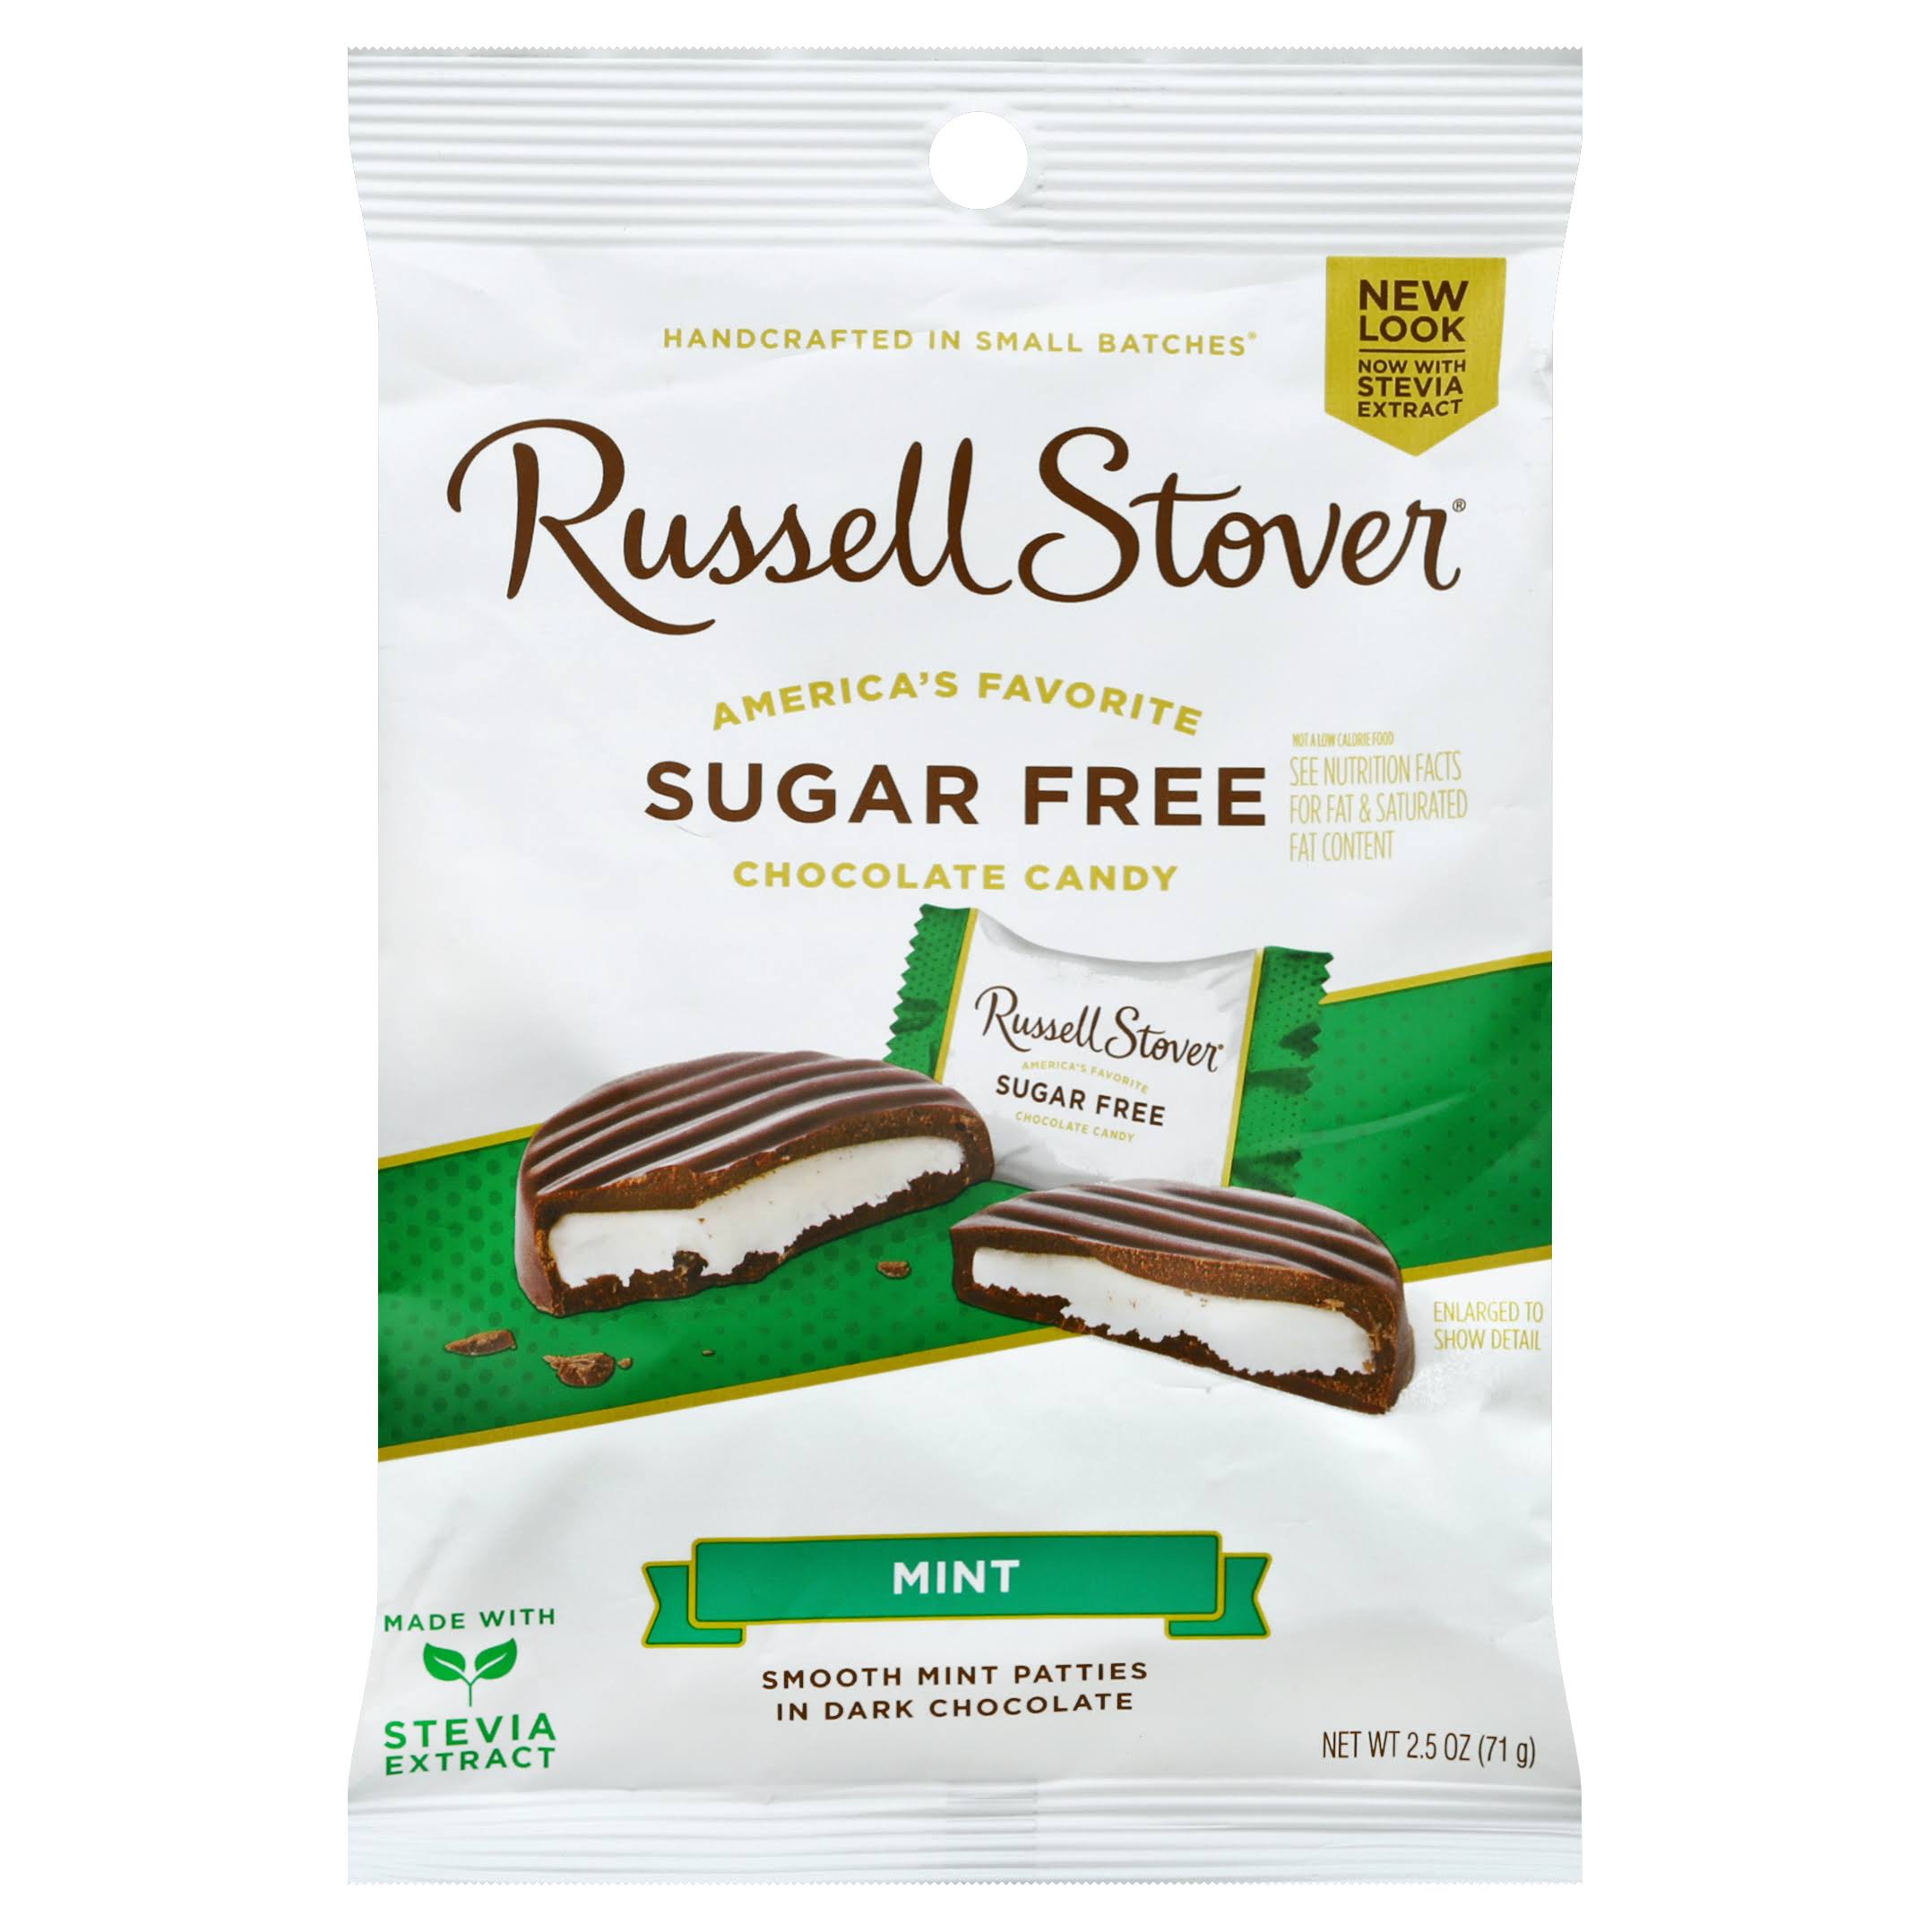 Russell Stover Sugar-Free Chocolate Covered Candy - Mint, 3oz